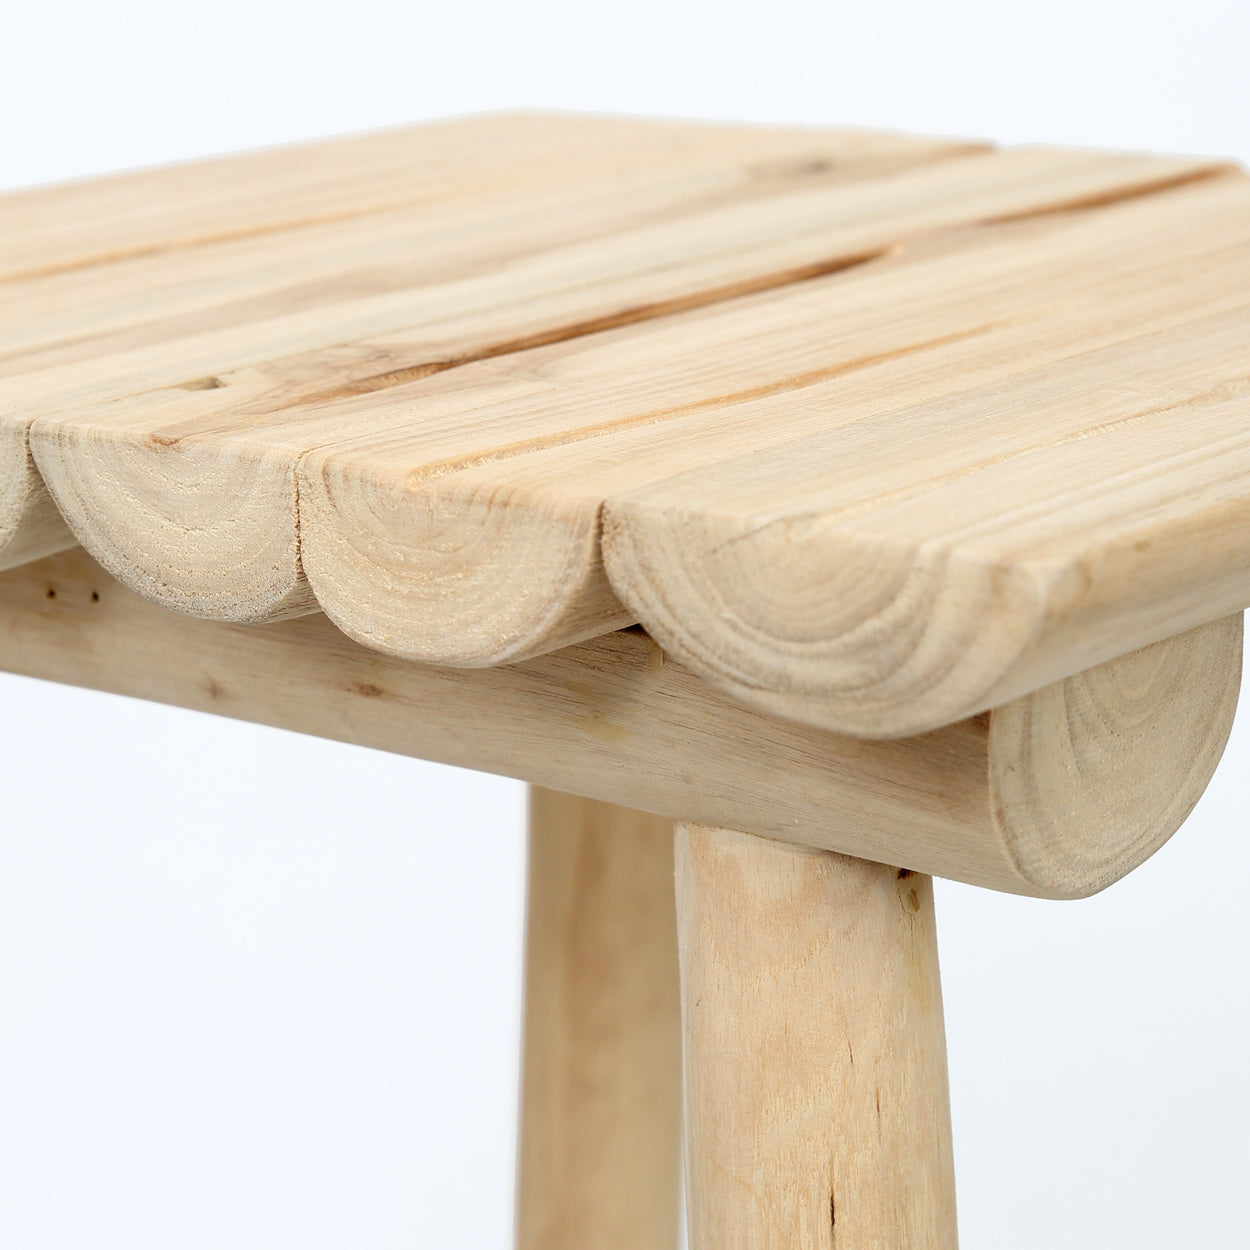 THE ISLAND Bar Stool detail of seat side view